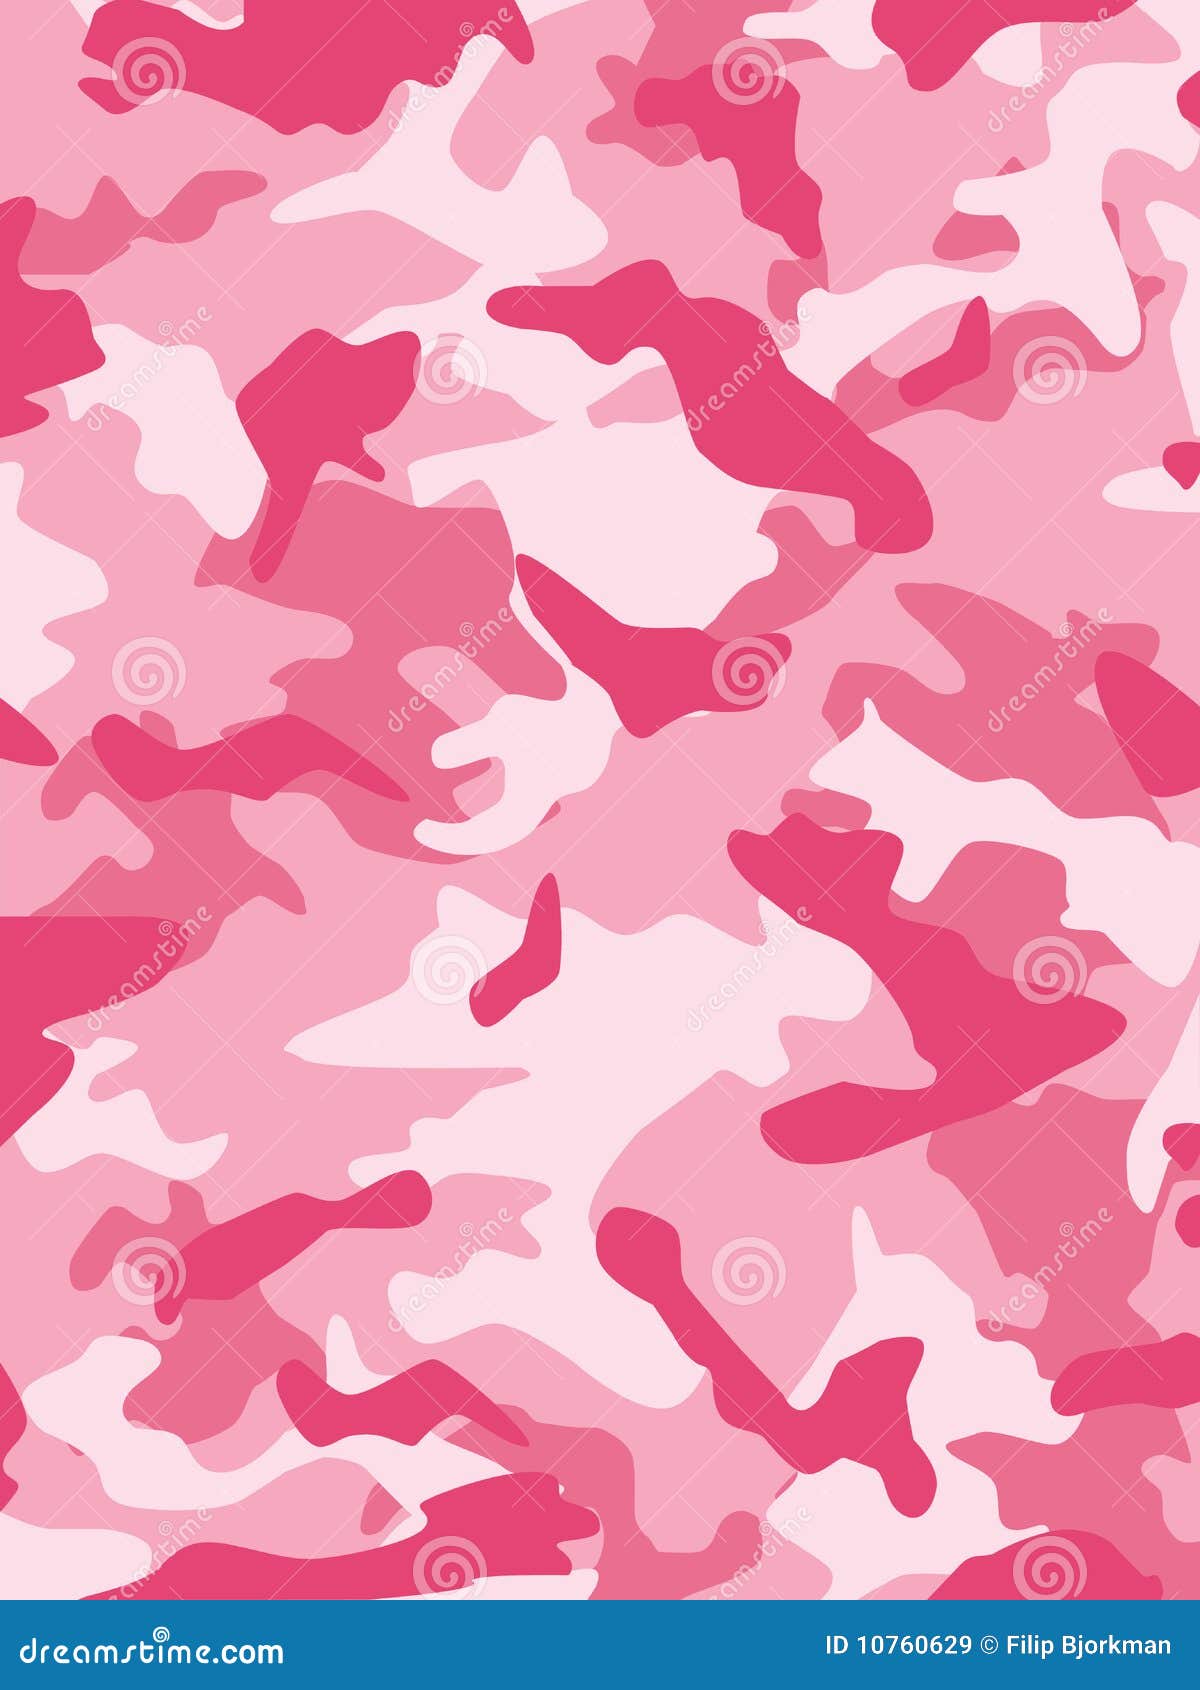 pink camouflage